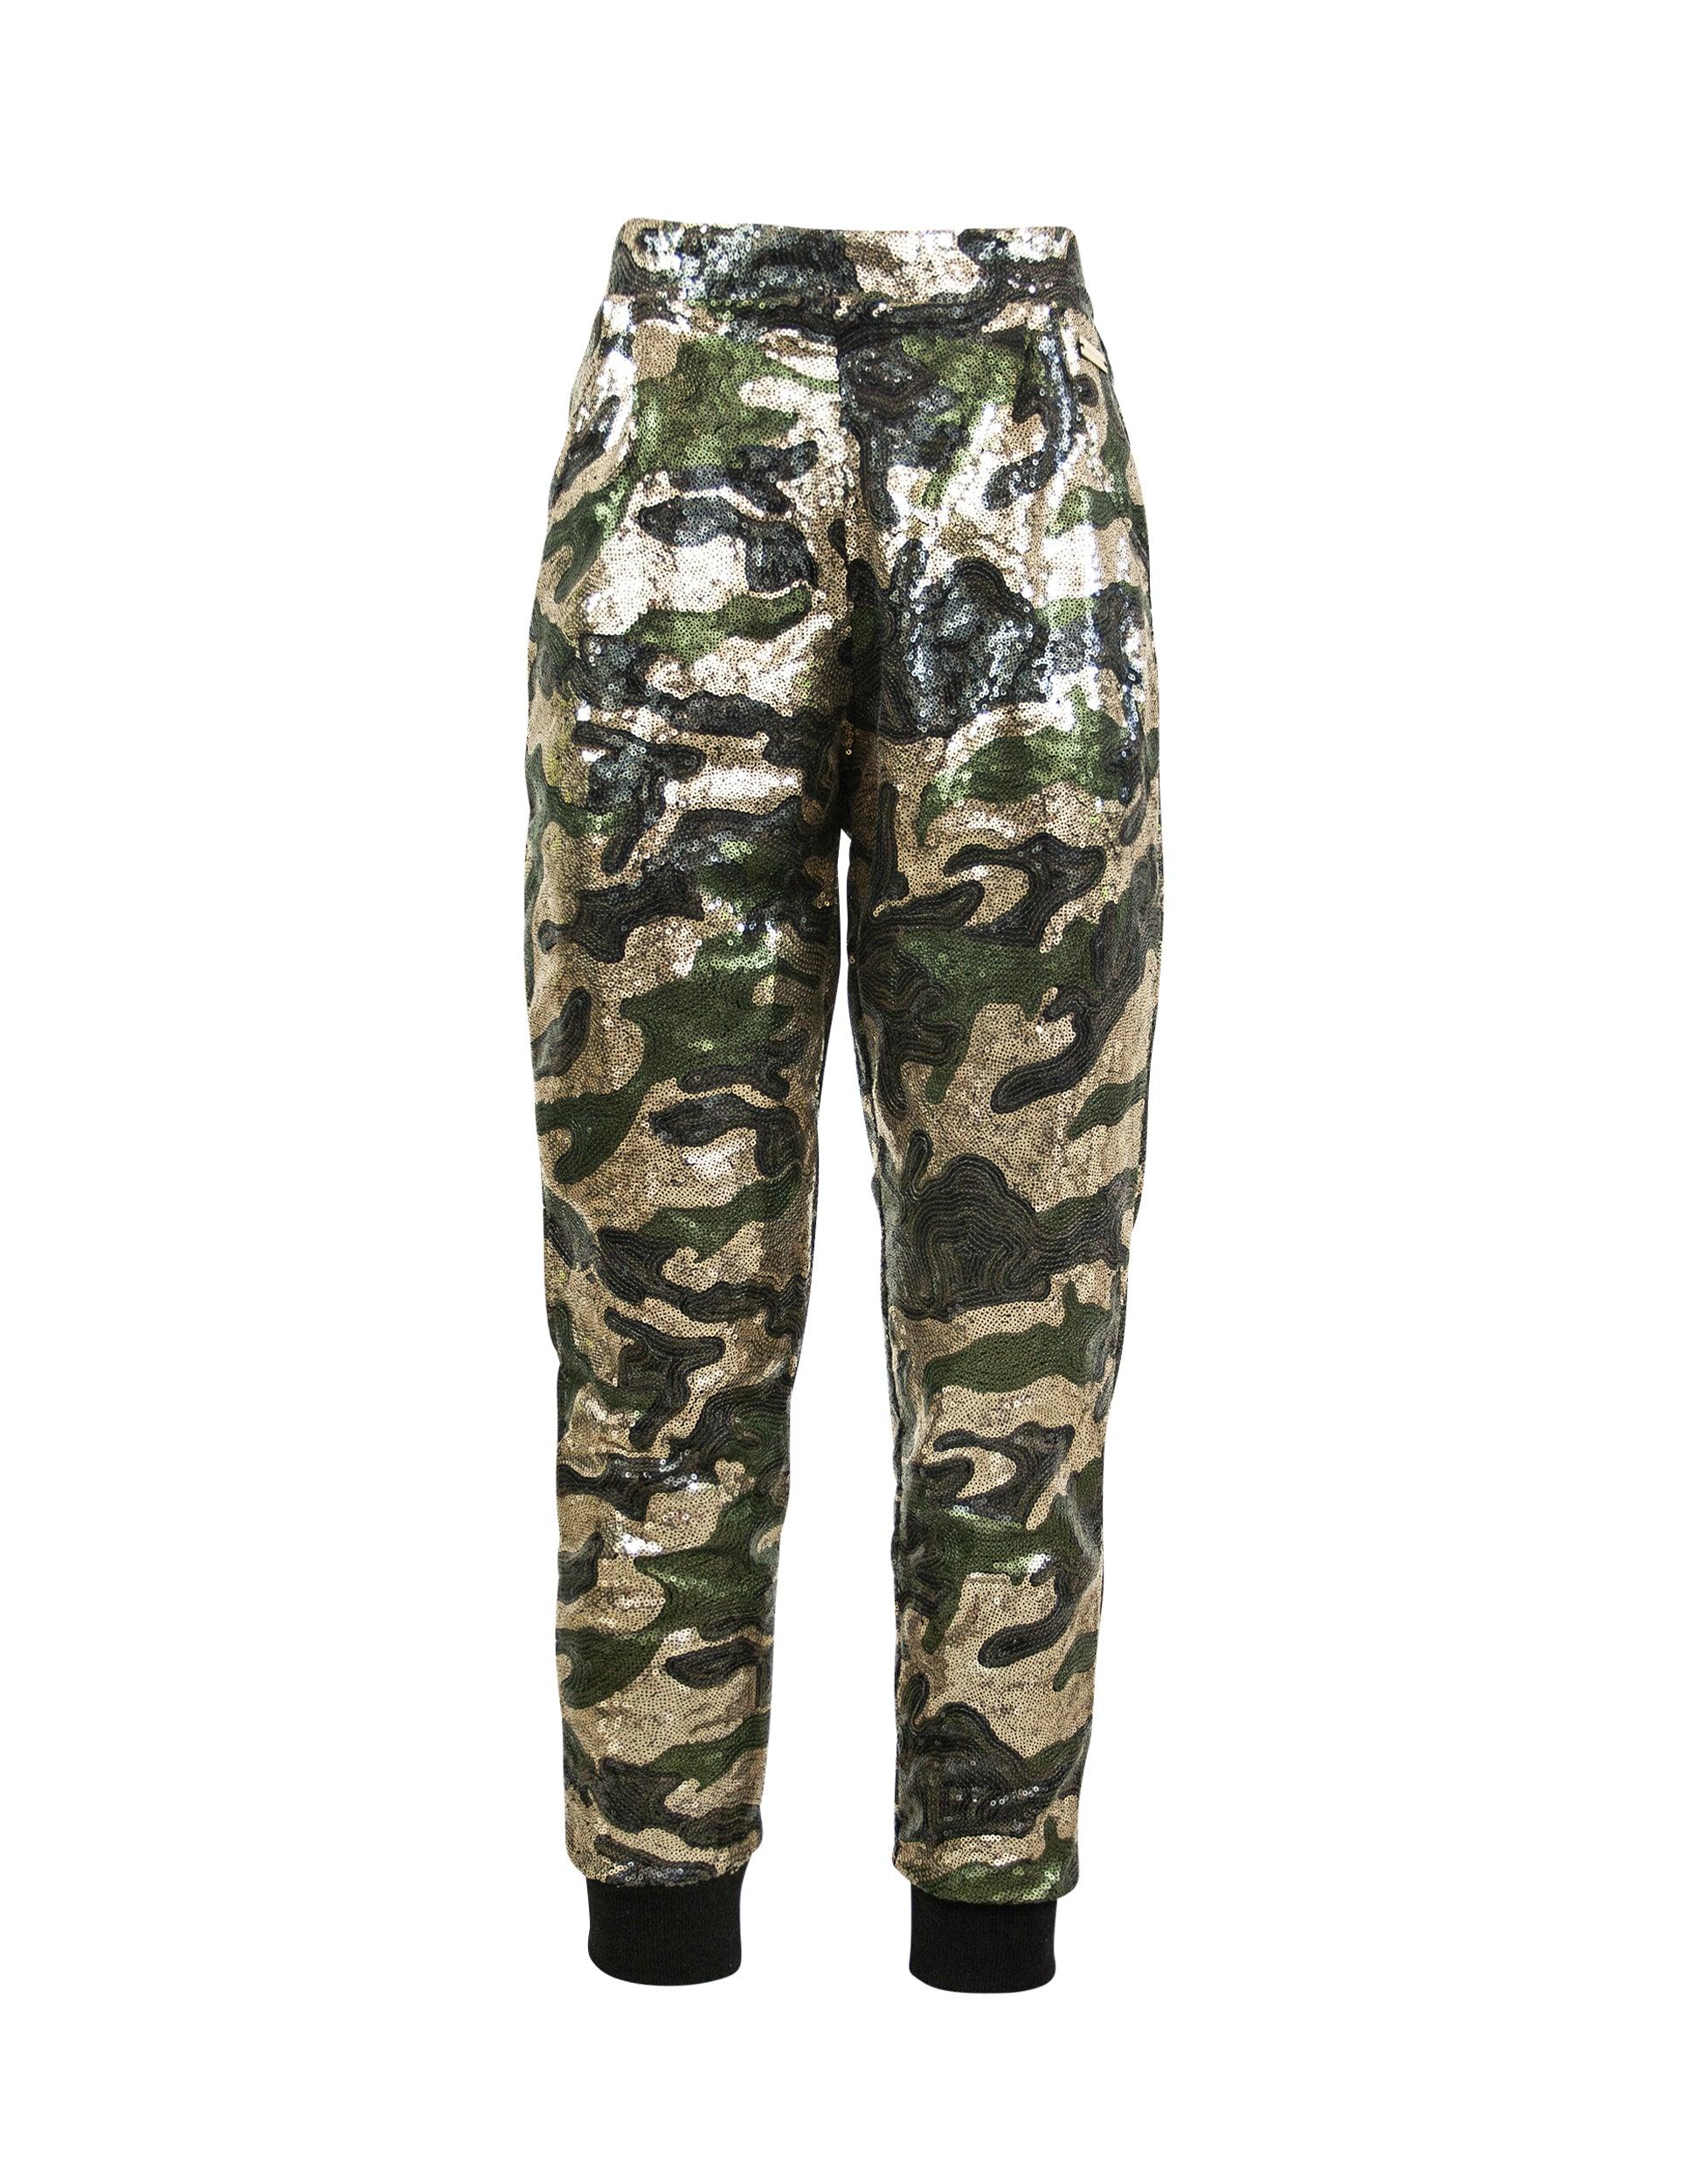 Kendall + Kylie Synthetic Pantaloni Militari In Paillettes Kendall + Kylie  | Lyst